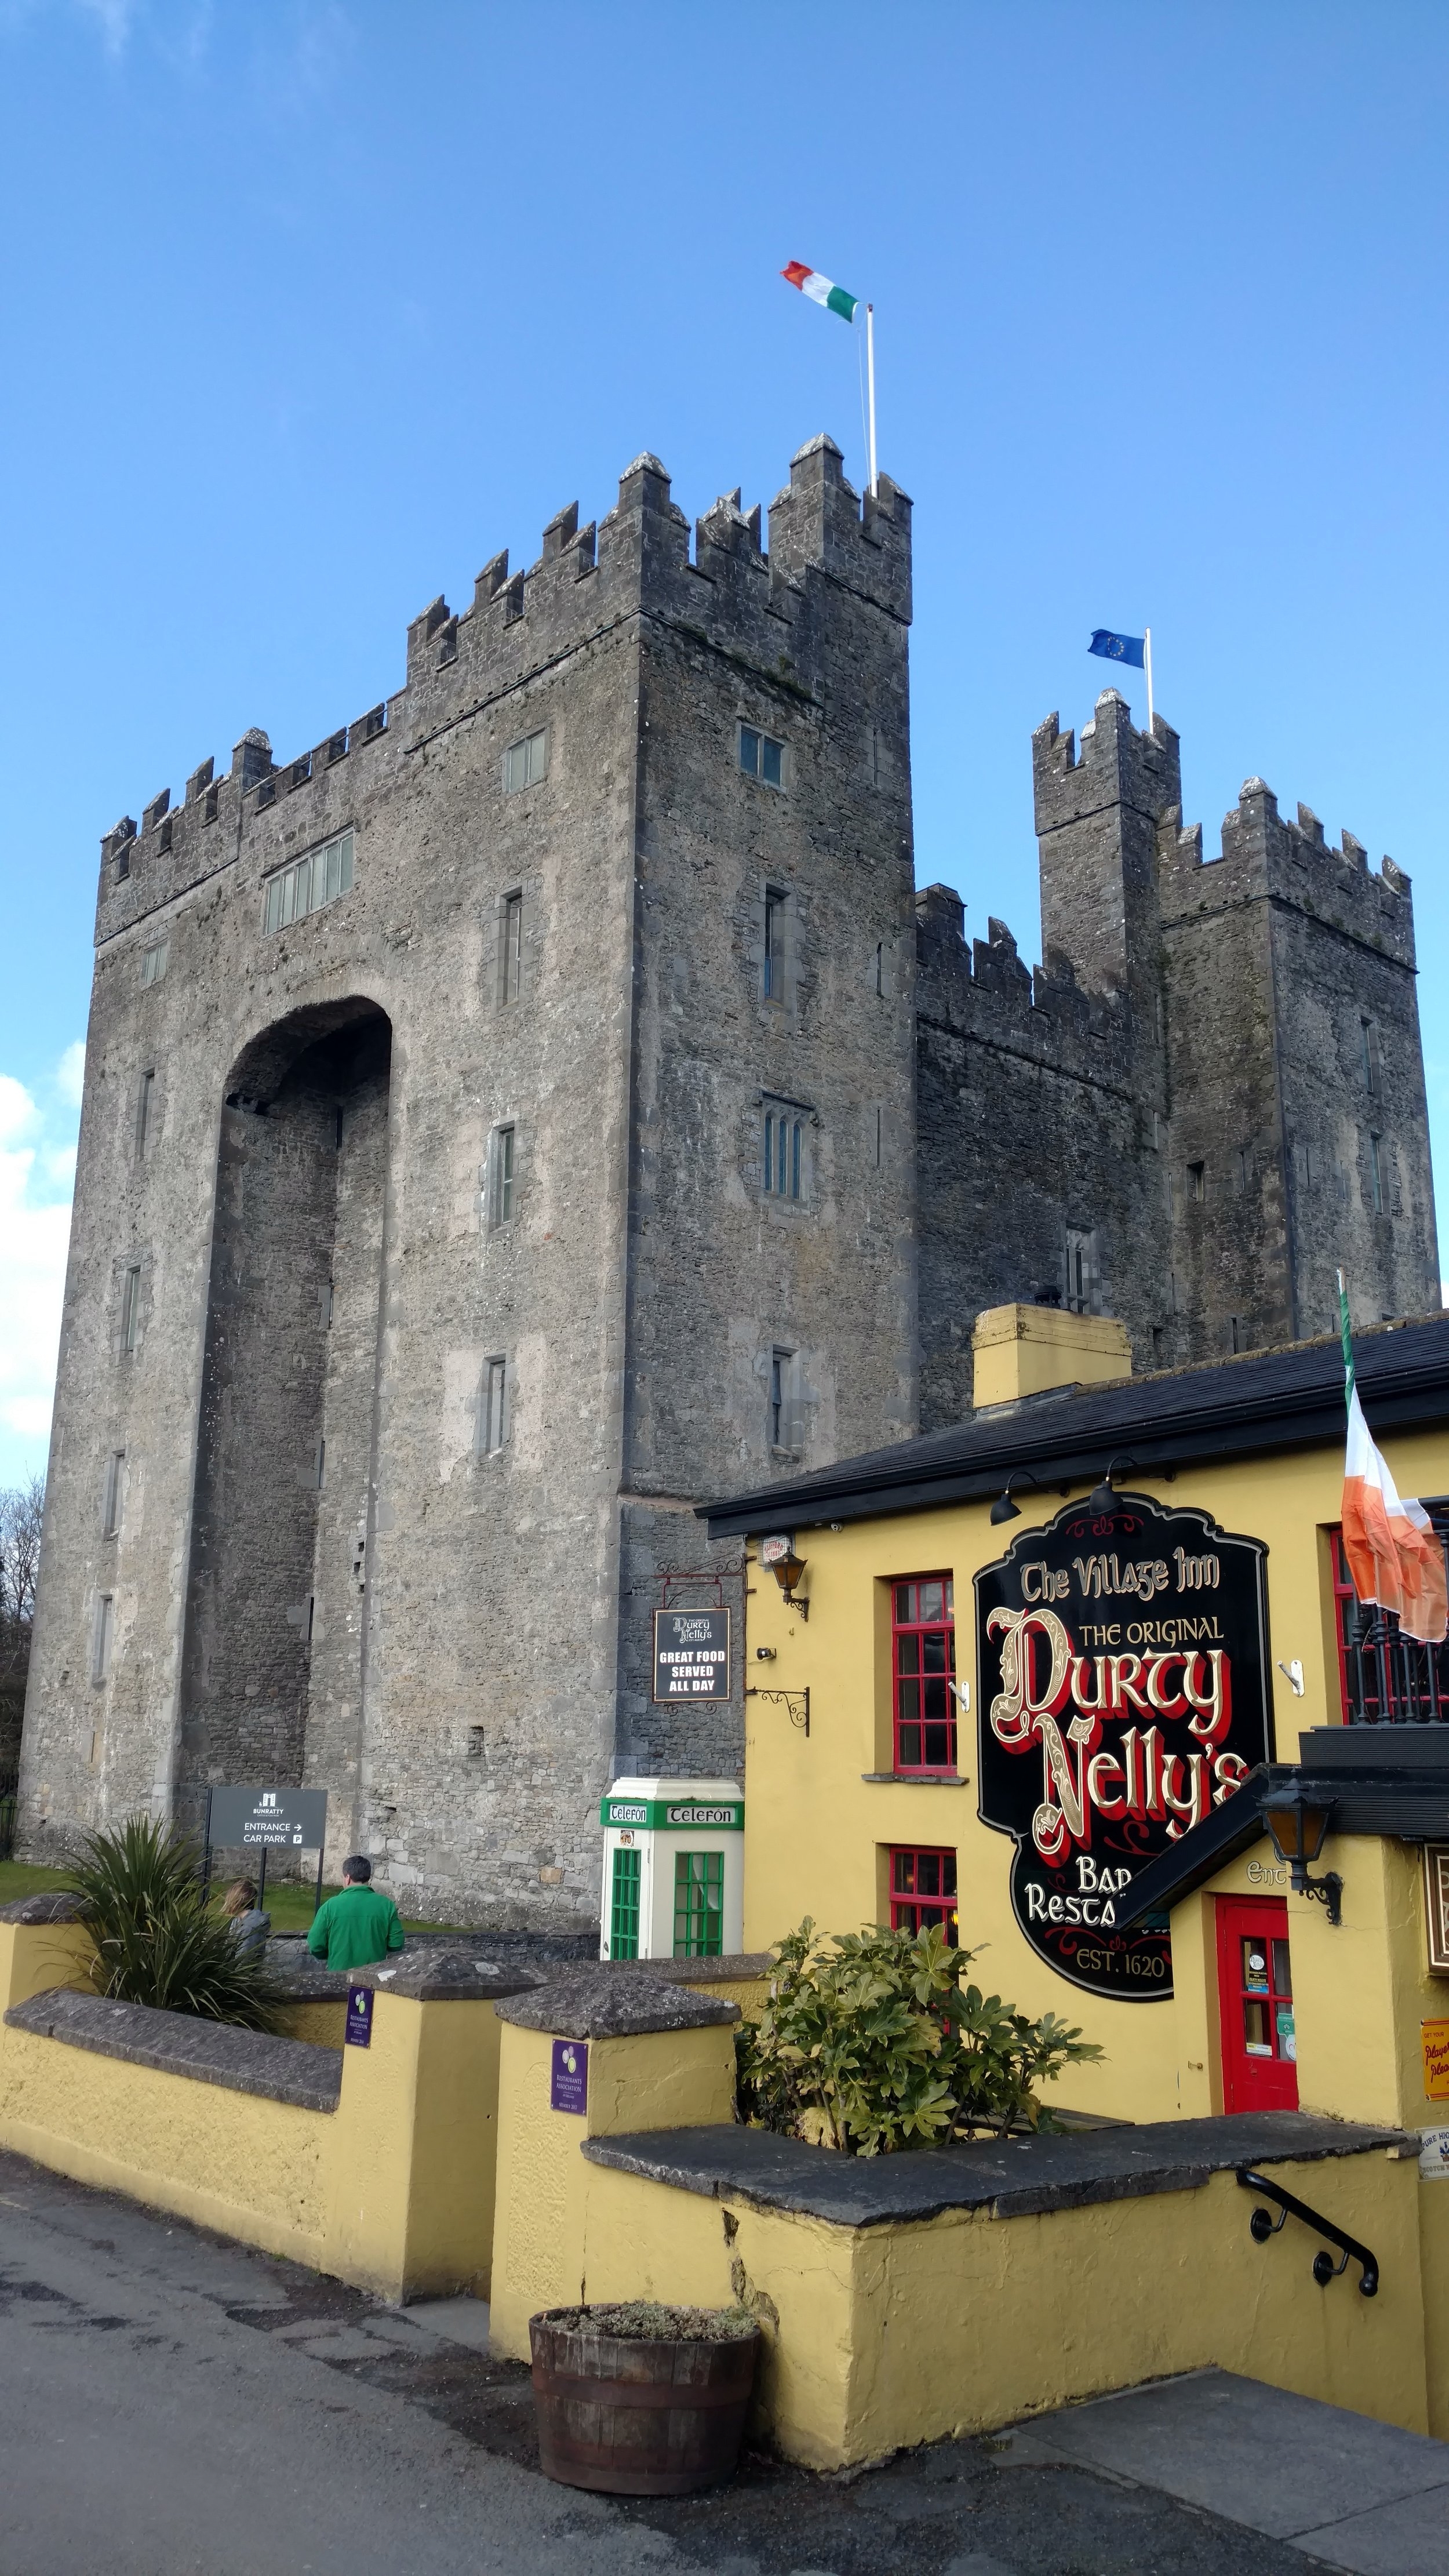 Bunratty Castle and Durty Nelly's, Bunratty